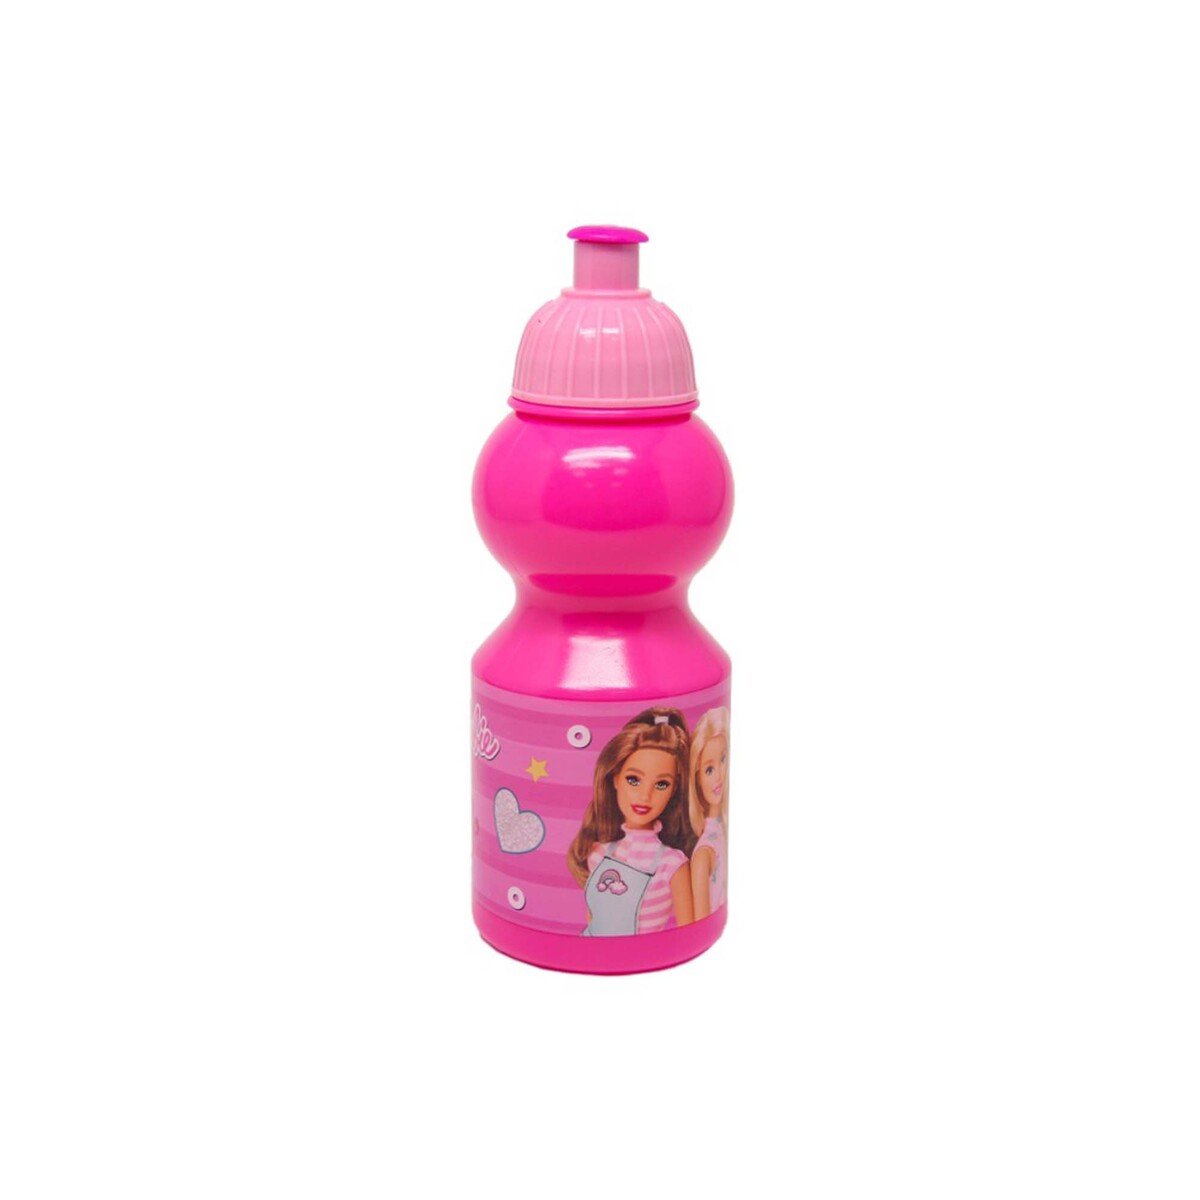 Barbie Combo Set Lunch Box with Water Bottle 45-0801